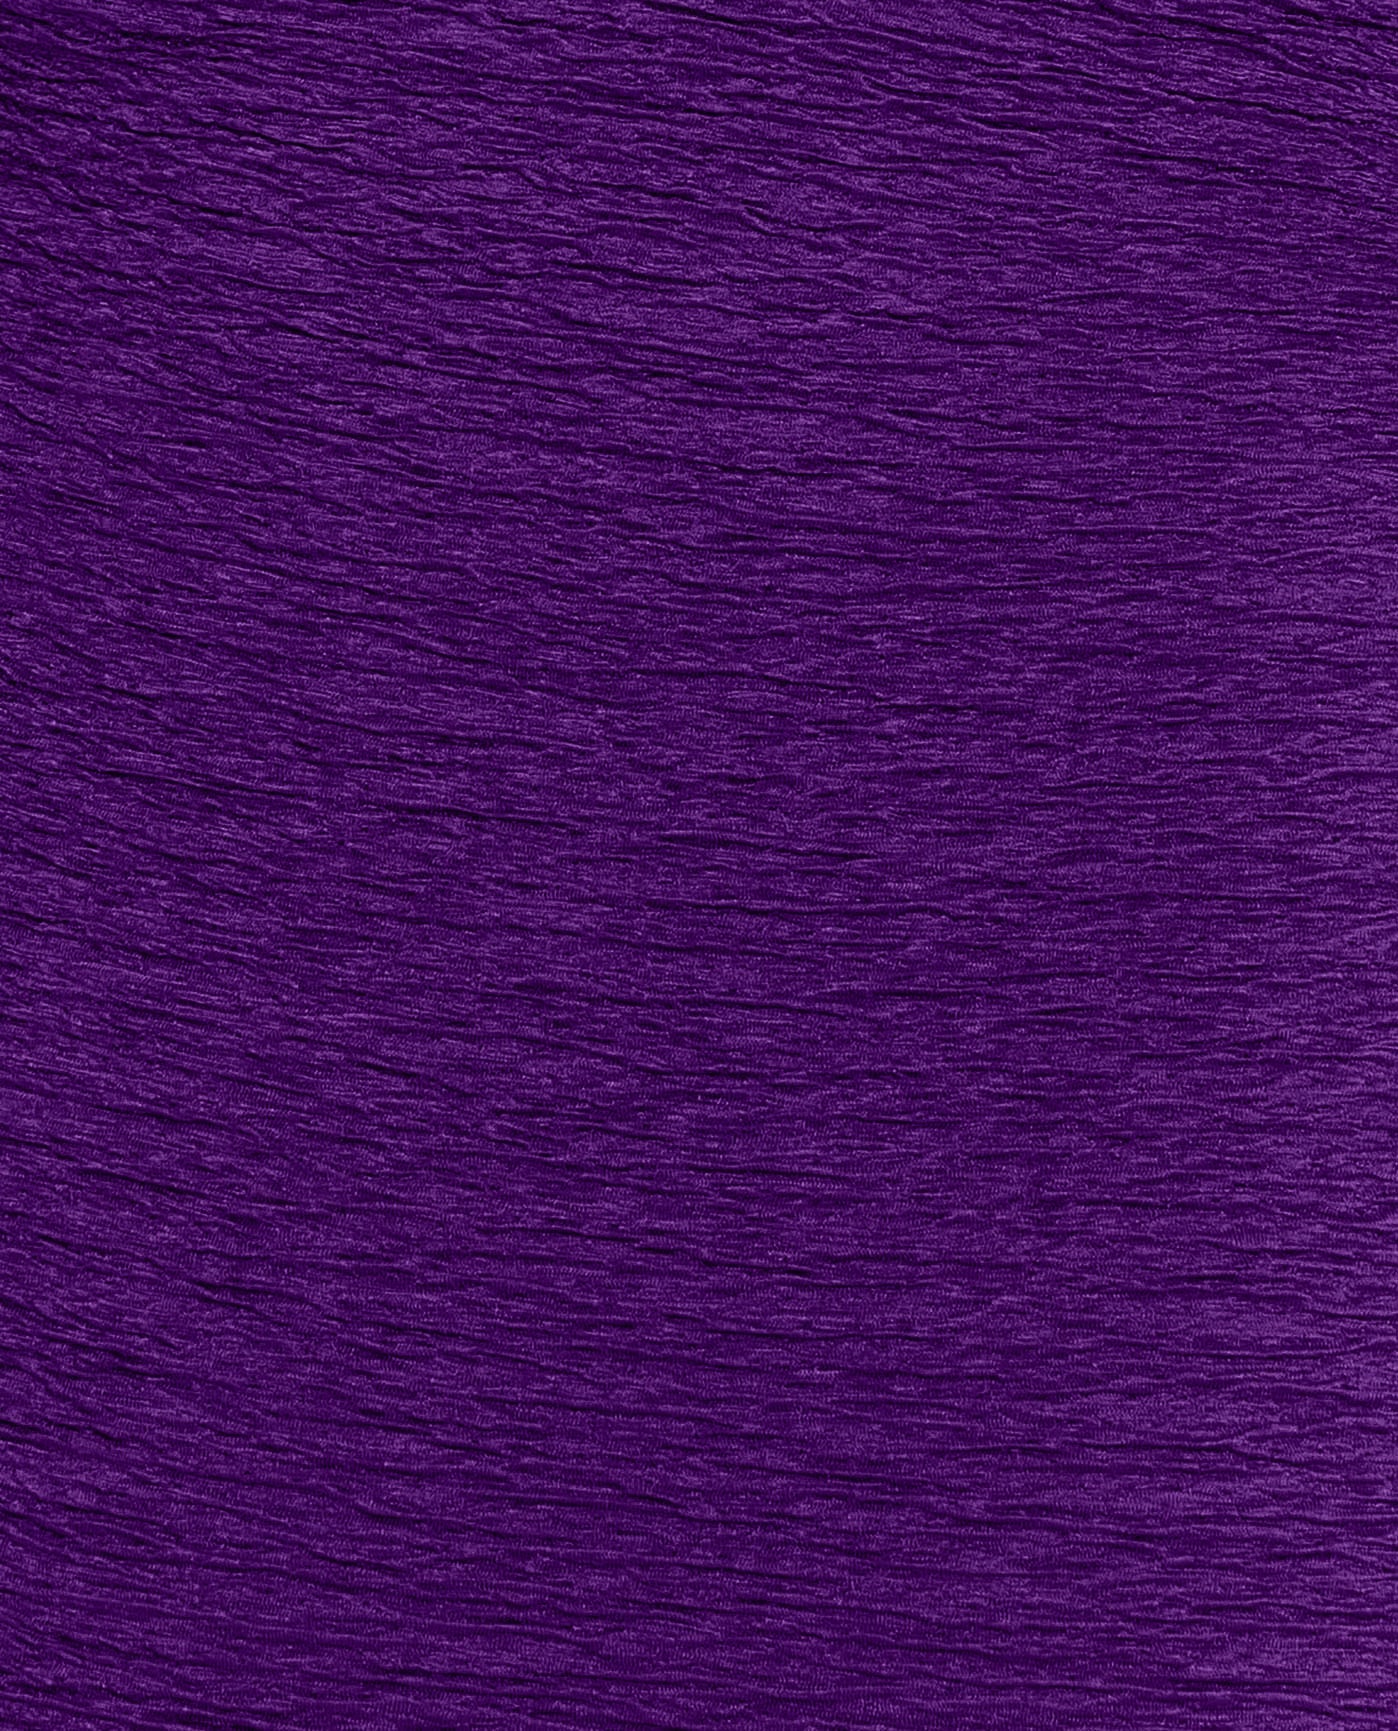 FABRIC SWATCH VIEW OF CHLORINE RESISTANT KRINKLE TEXTURED SOLID ACTIVE BACK ONE PIECE | KRINKLE ACAI PURPLE